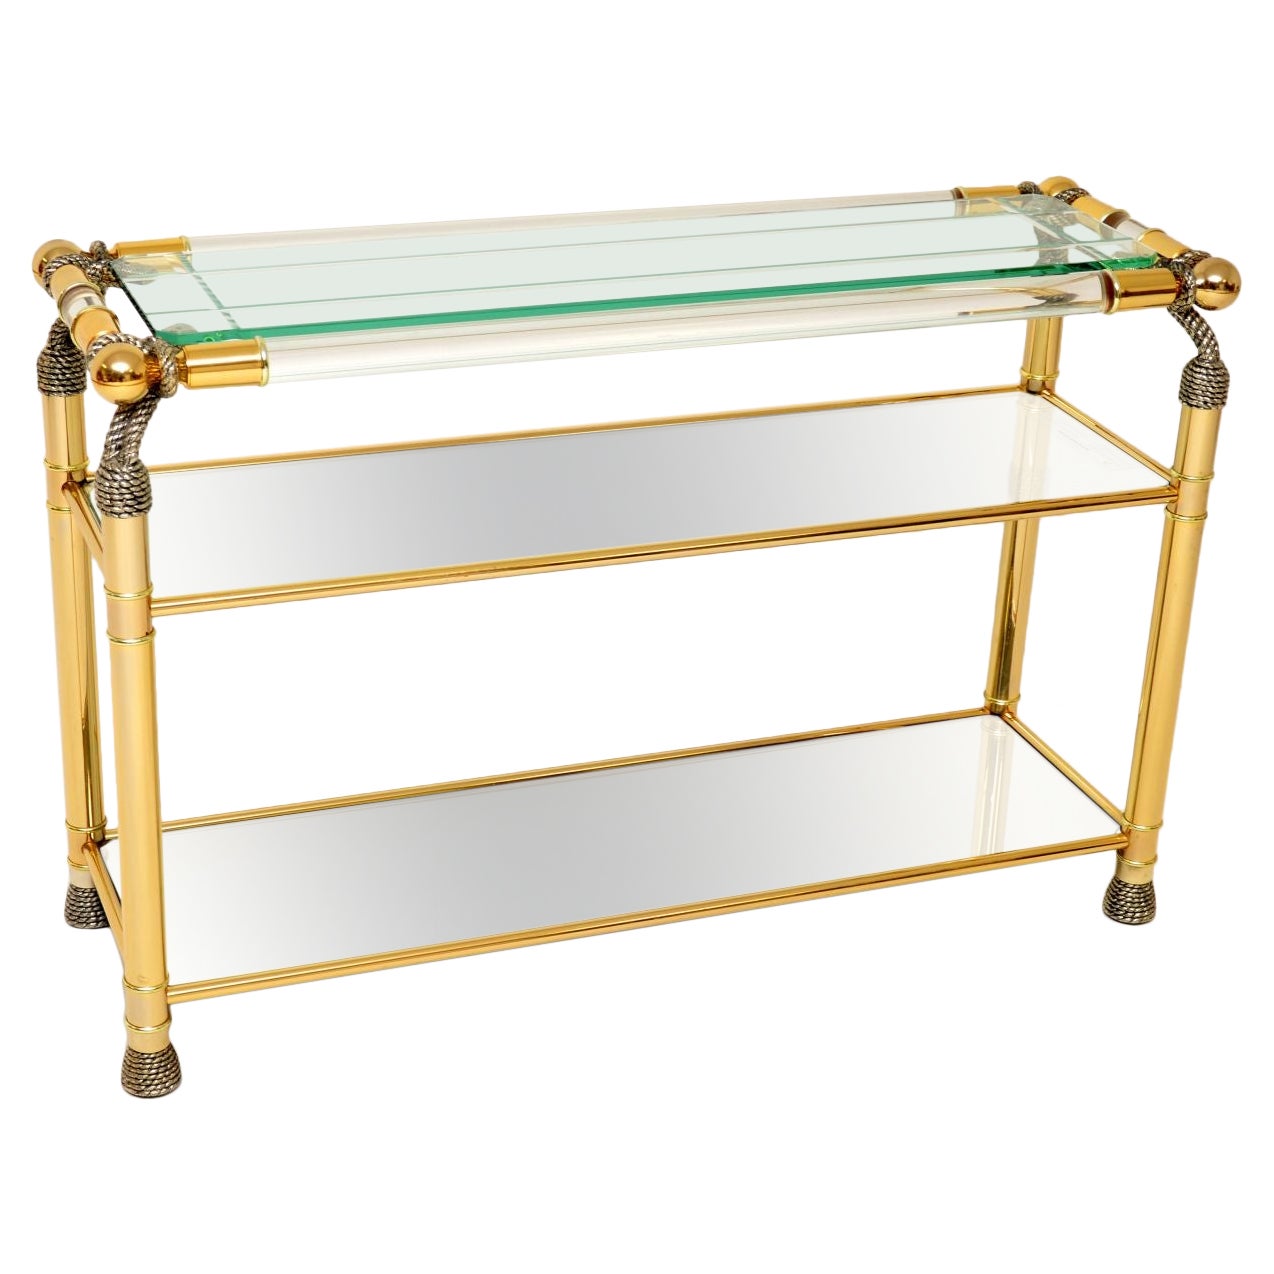 1970's Vintage Lucite & Gold Leaf Console Table by Curvasa